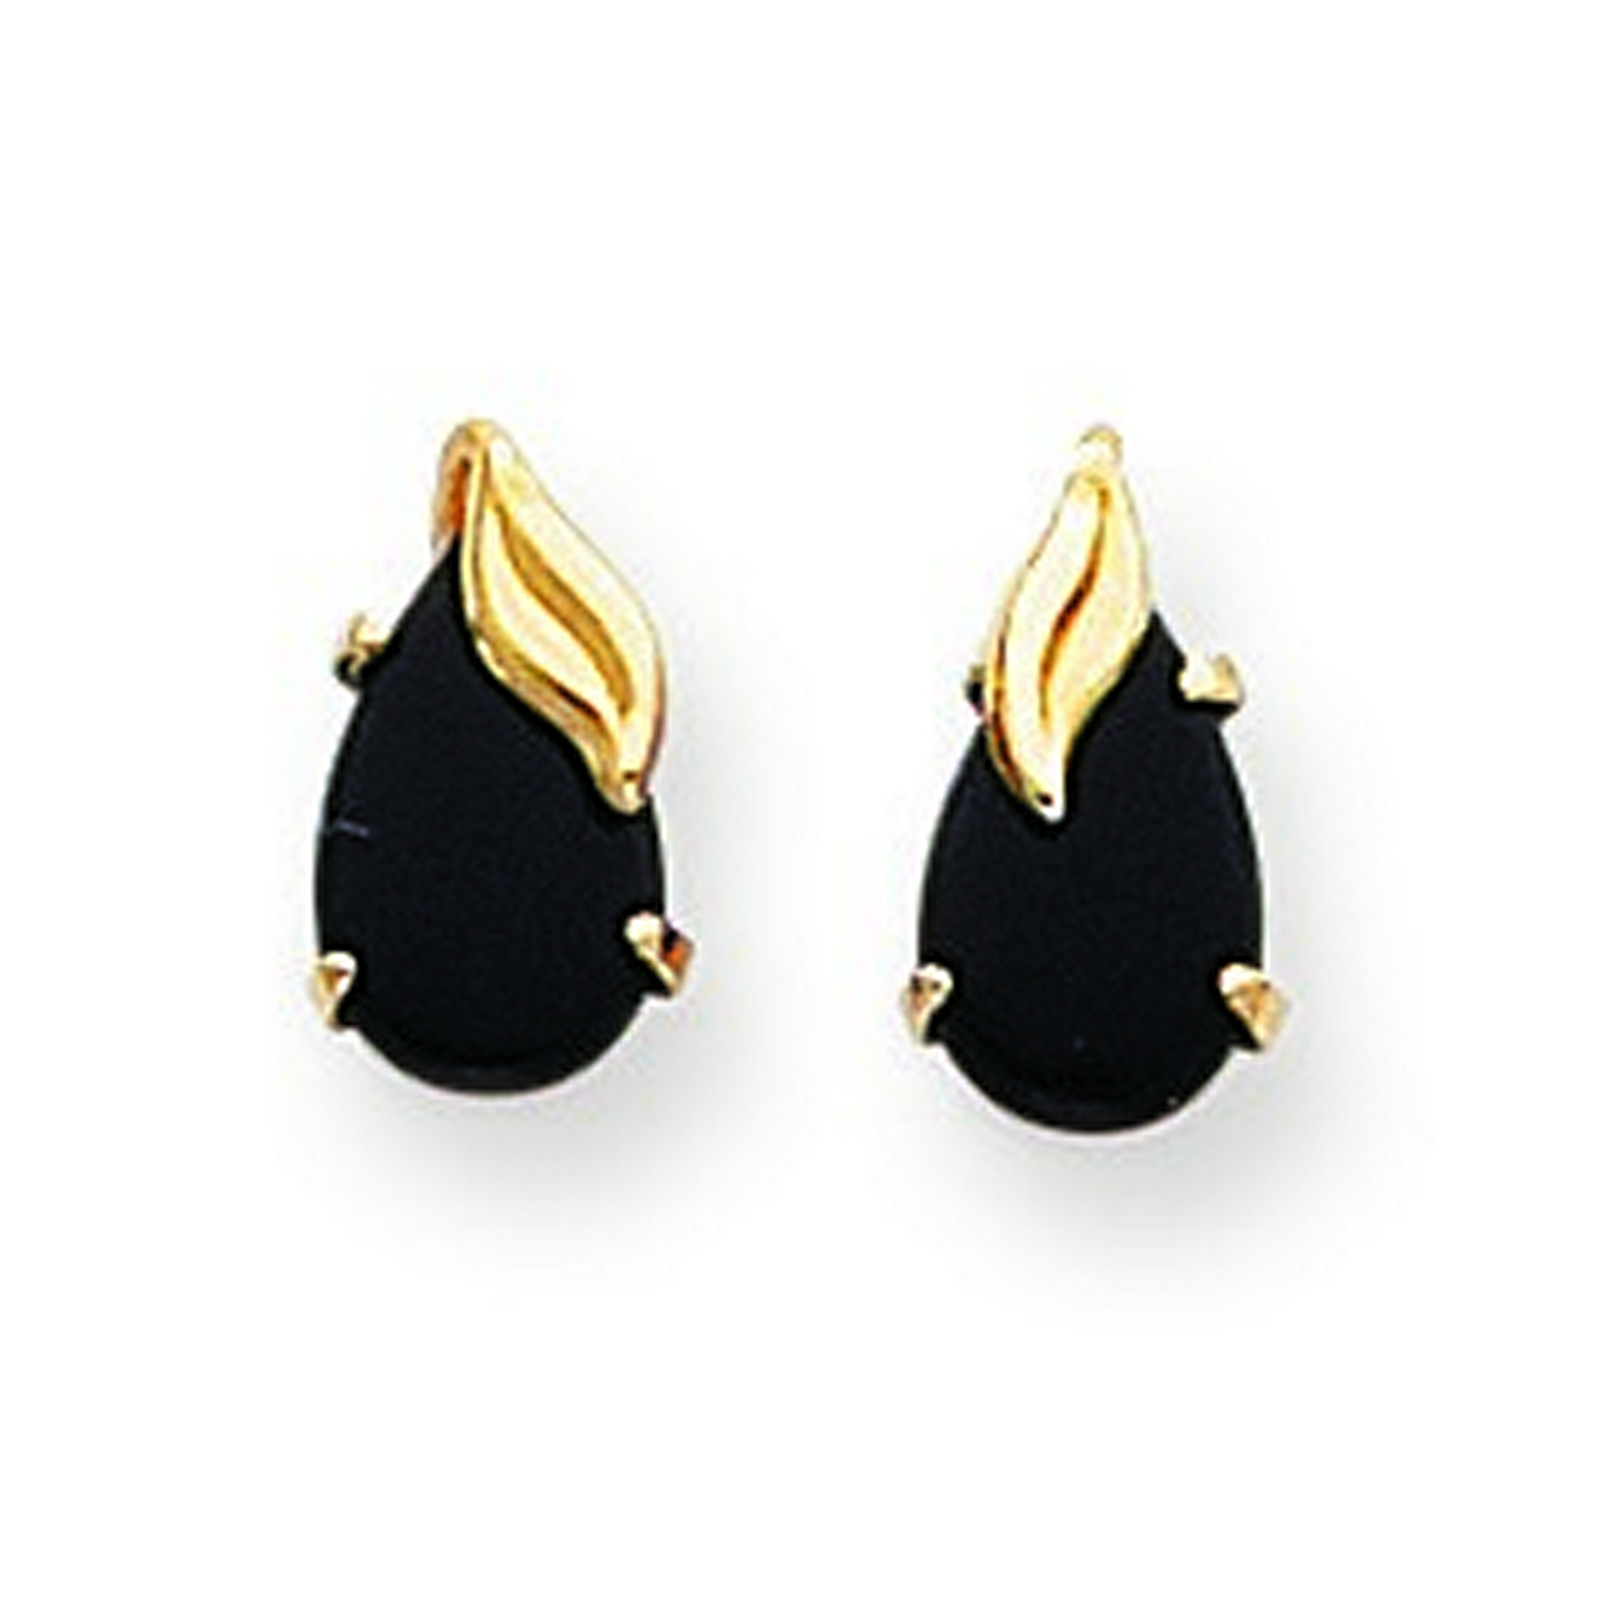 14k Yellow Gold Pear Shaped Onyx With Leaf Earrings - Measures 10x5mm